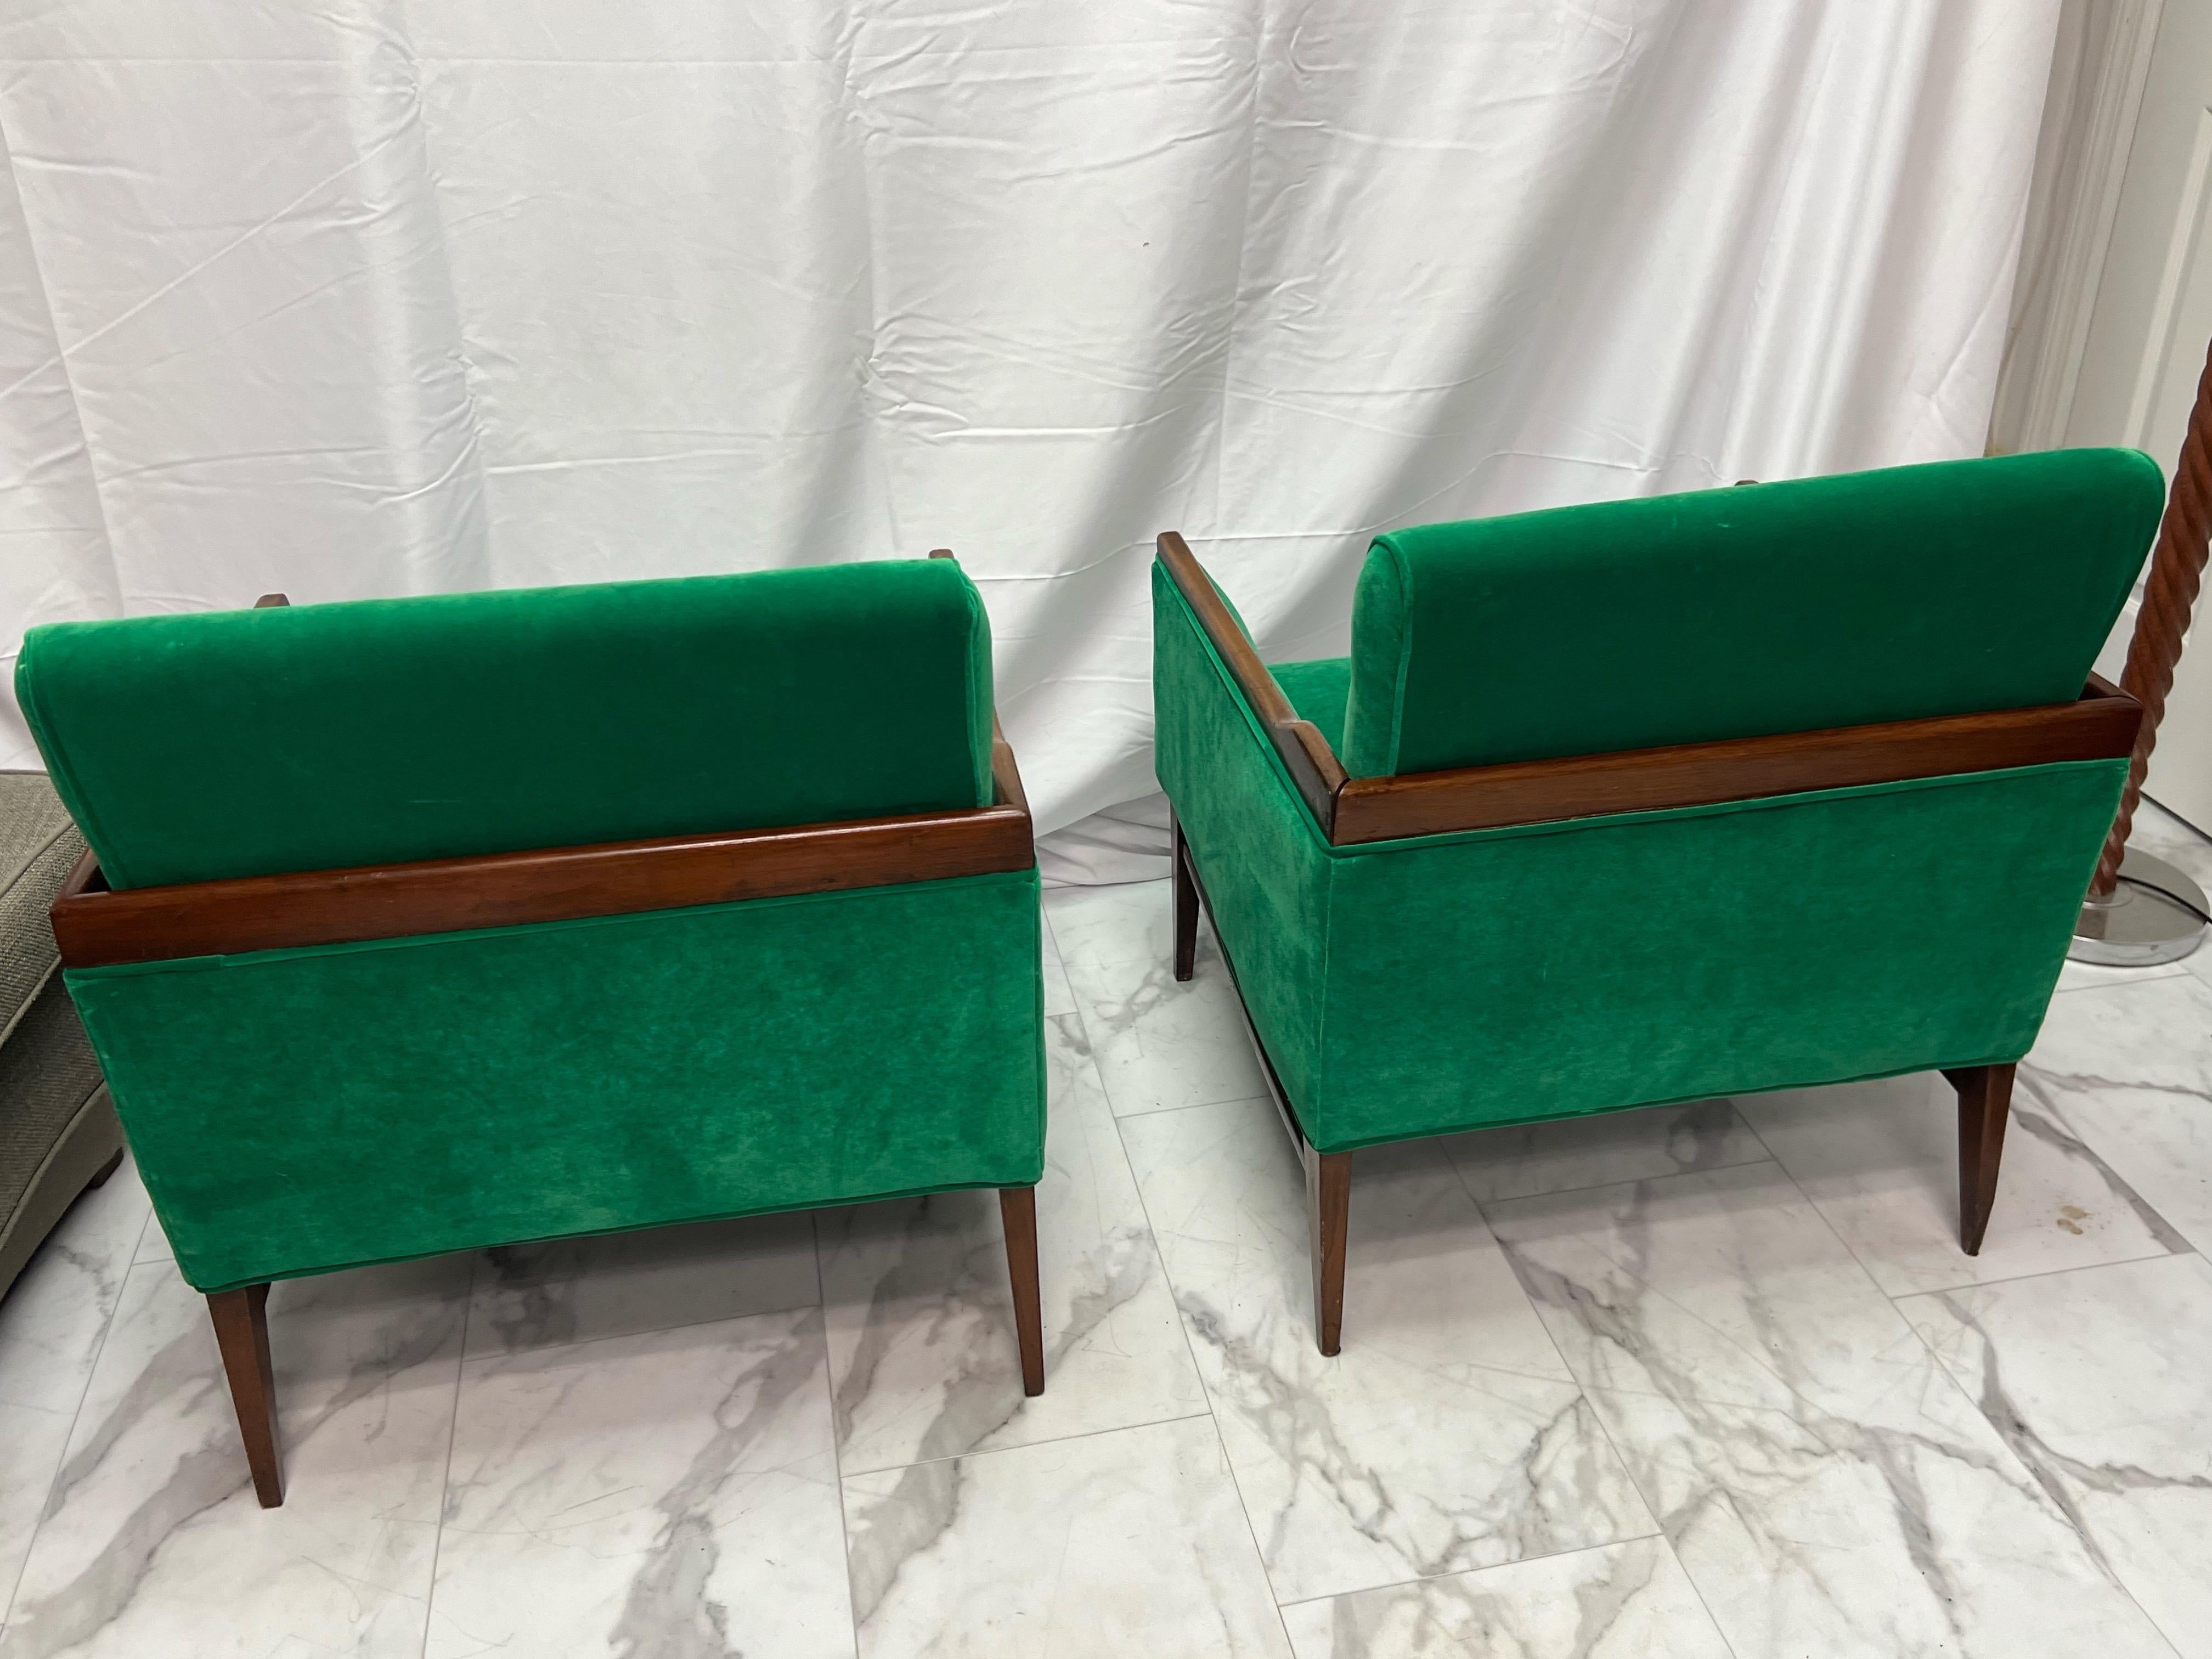 1950’s Walnut and Green Velvet Low Profile Chairs - a Pair For Sale 4